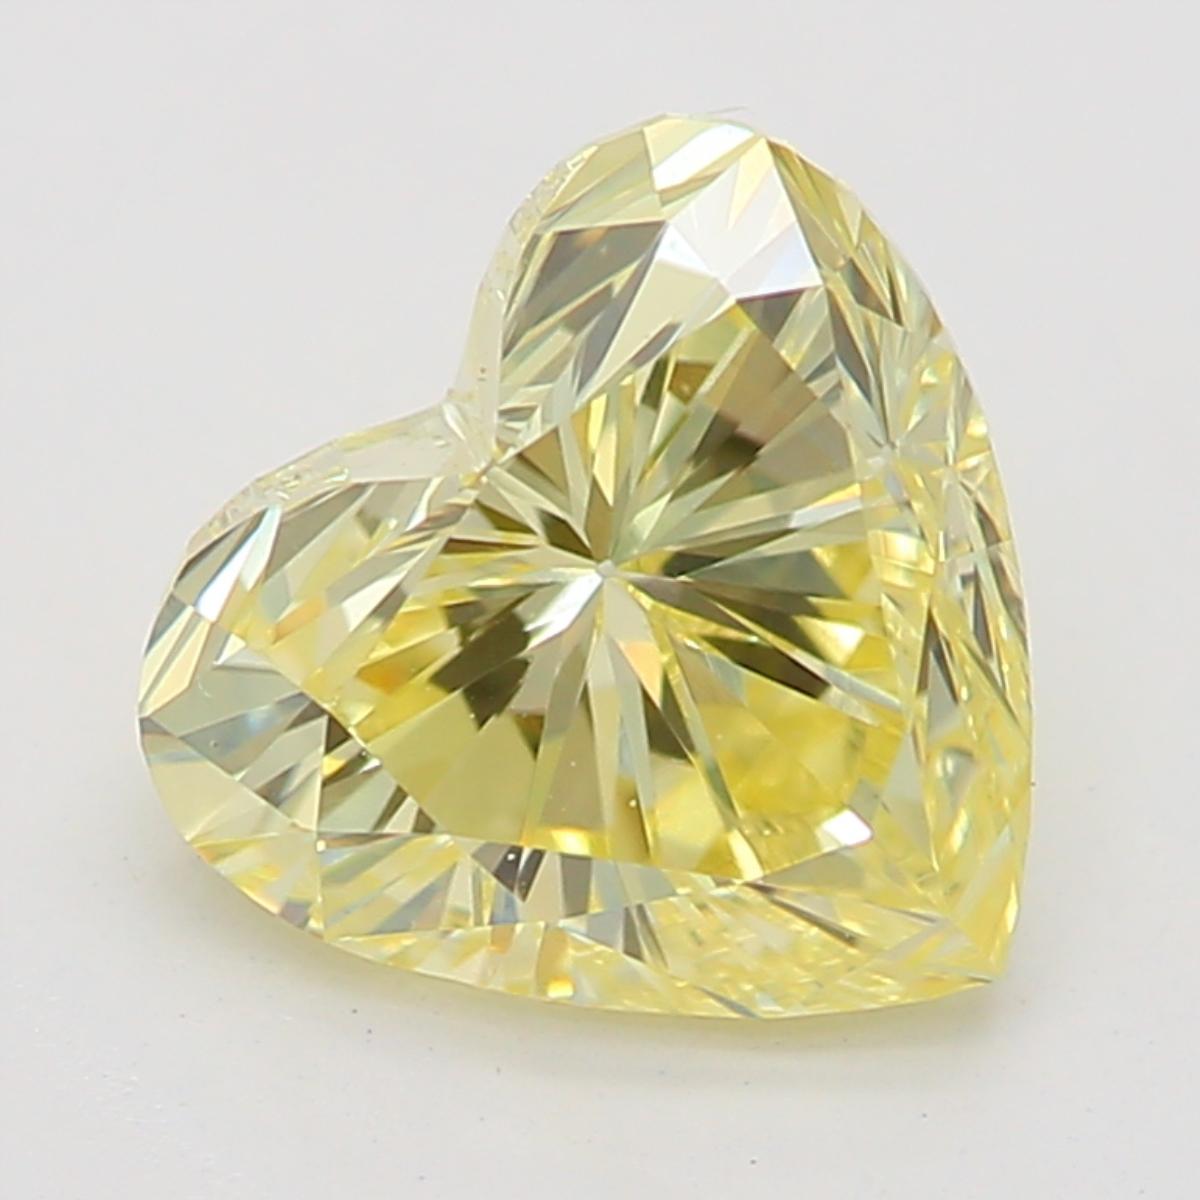 *100% NATURAL FANCY COLOUR DIAMOND*

✪ Diamond Details ✪

➛ Shape: Heart
➛ Colour Grade: Fancy Yellow
➛ Carat: 0.84
➛ Clarity: VS1
➛ GIA Certified 

^FEATURES OF THE DIAMOND^

This heart-shaped diamond is a unique and romantic choice for an